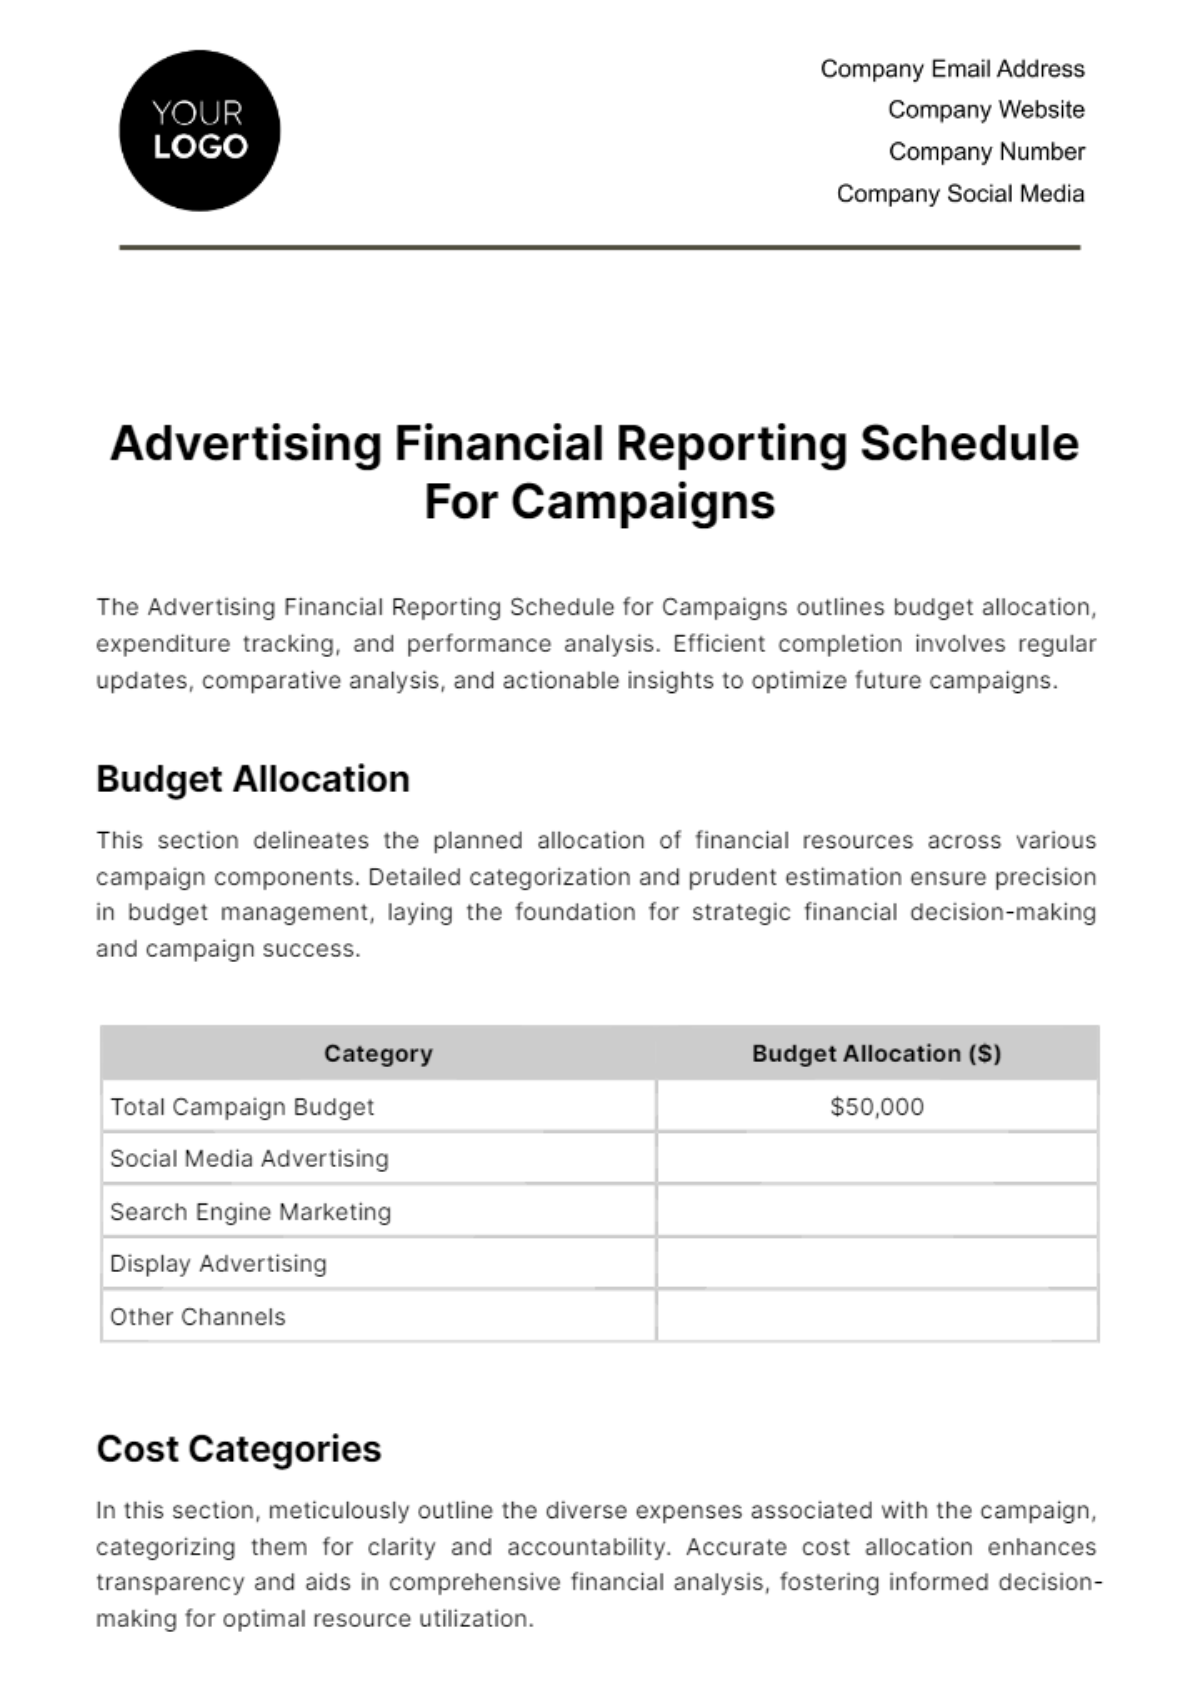 Free Advertising Financial Reporting Schedule for Campaigns Template